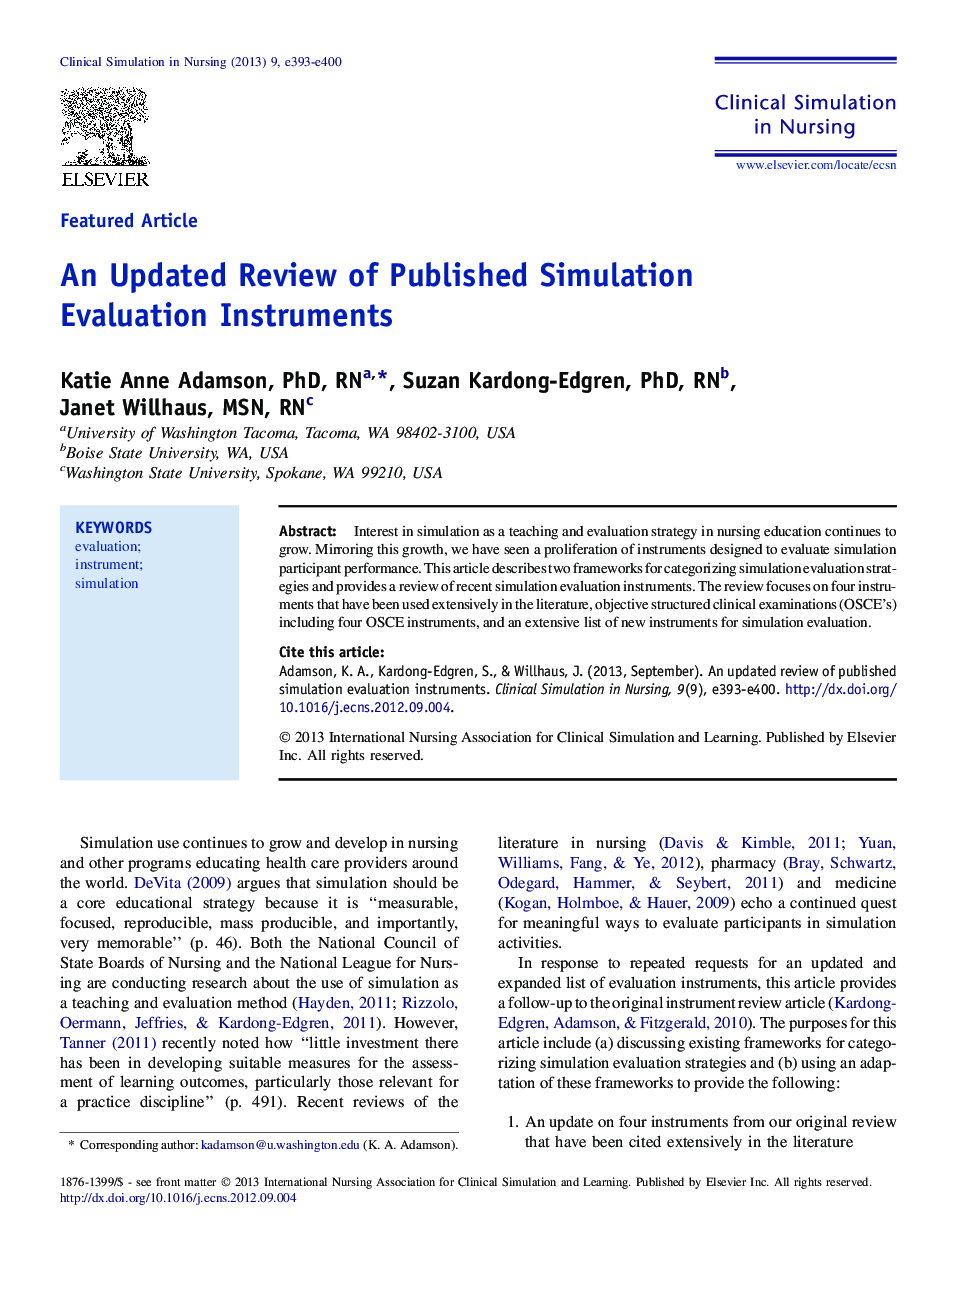 An Updated Review of Published Simulation Evaluation Instruments